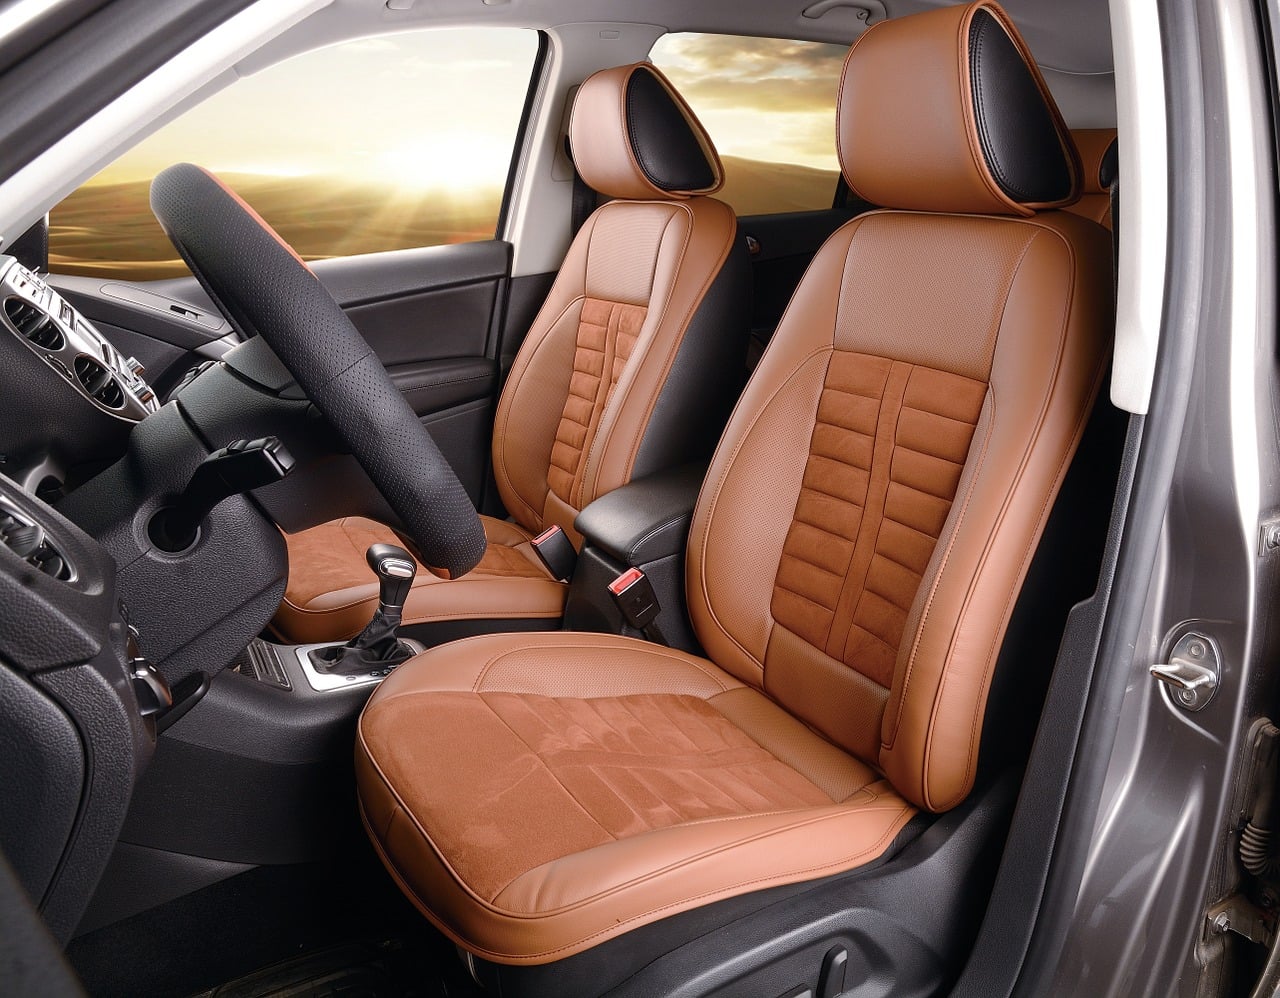 Automotive leather and furniture